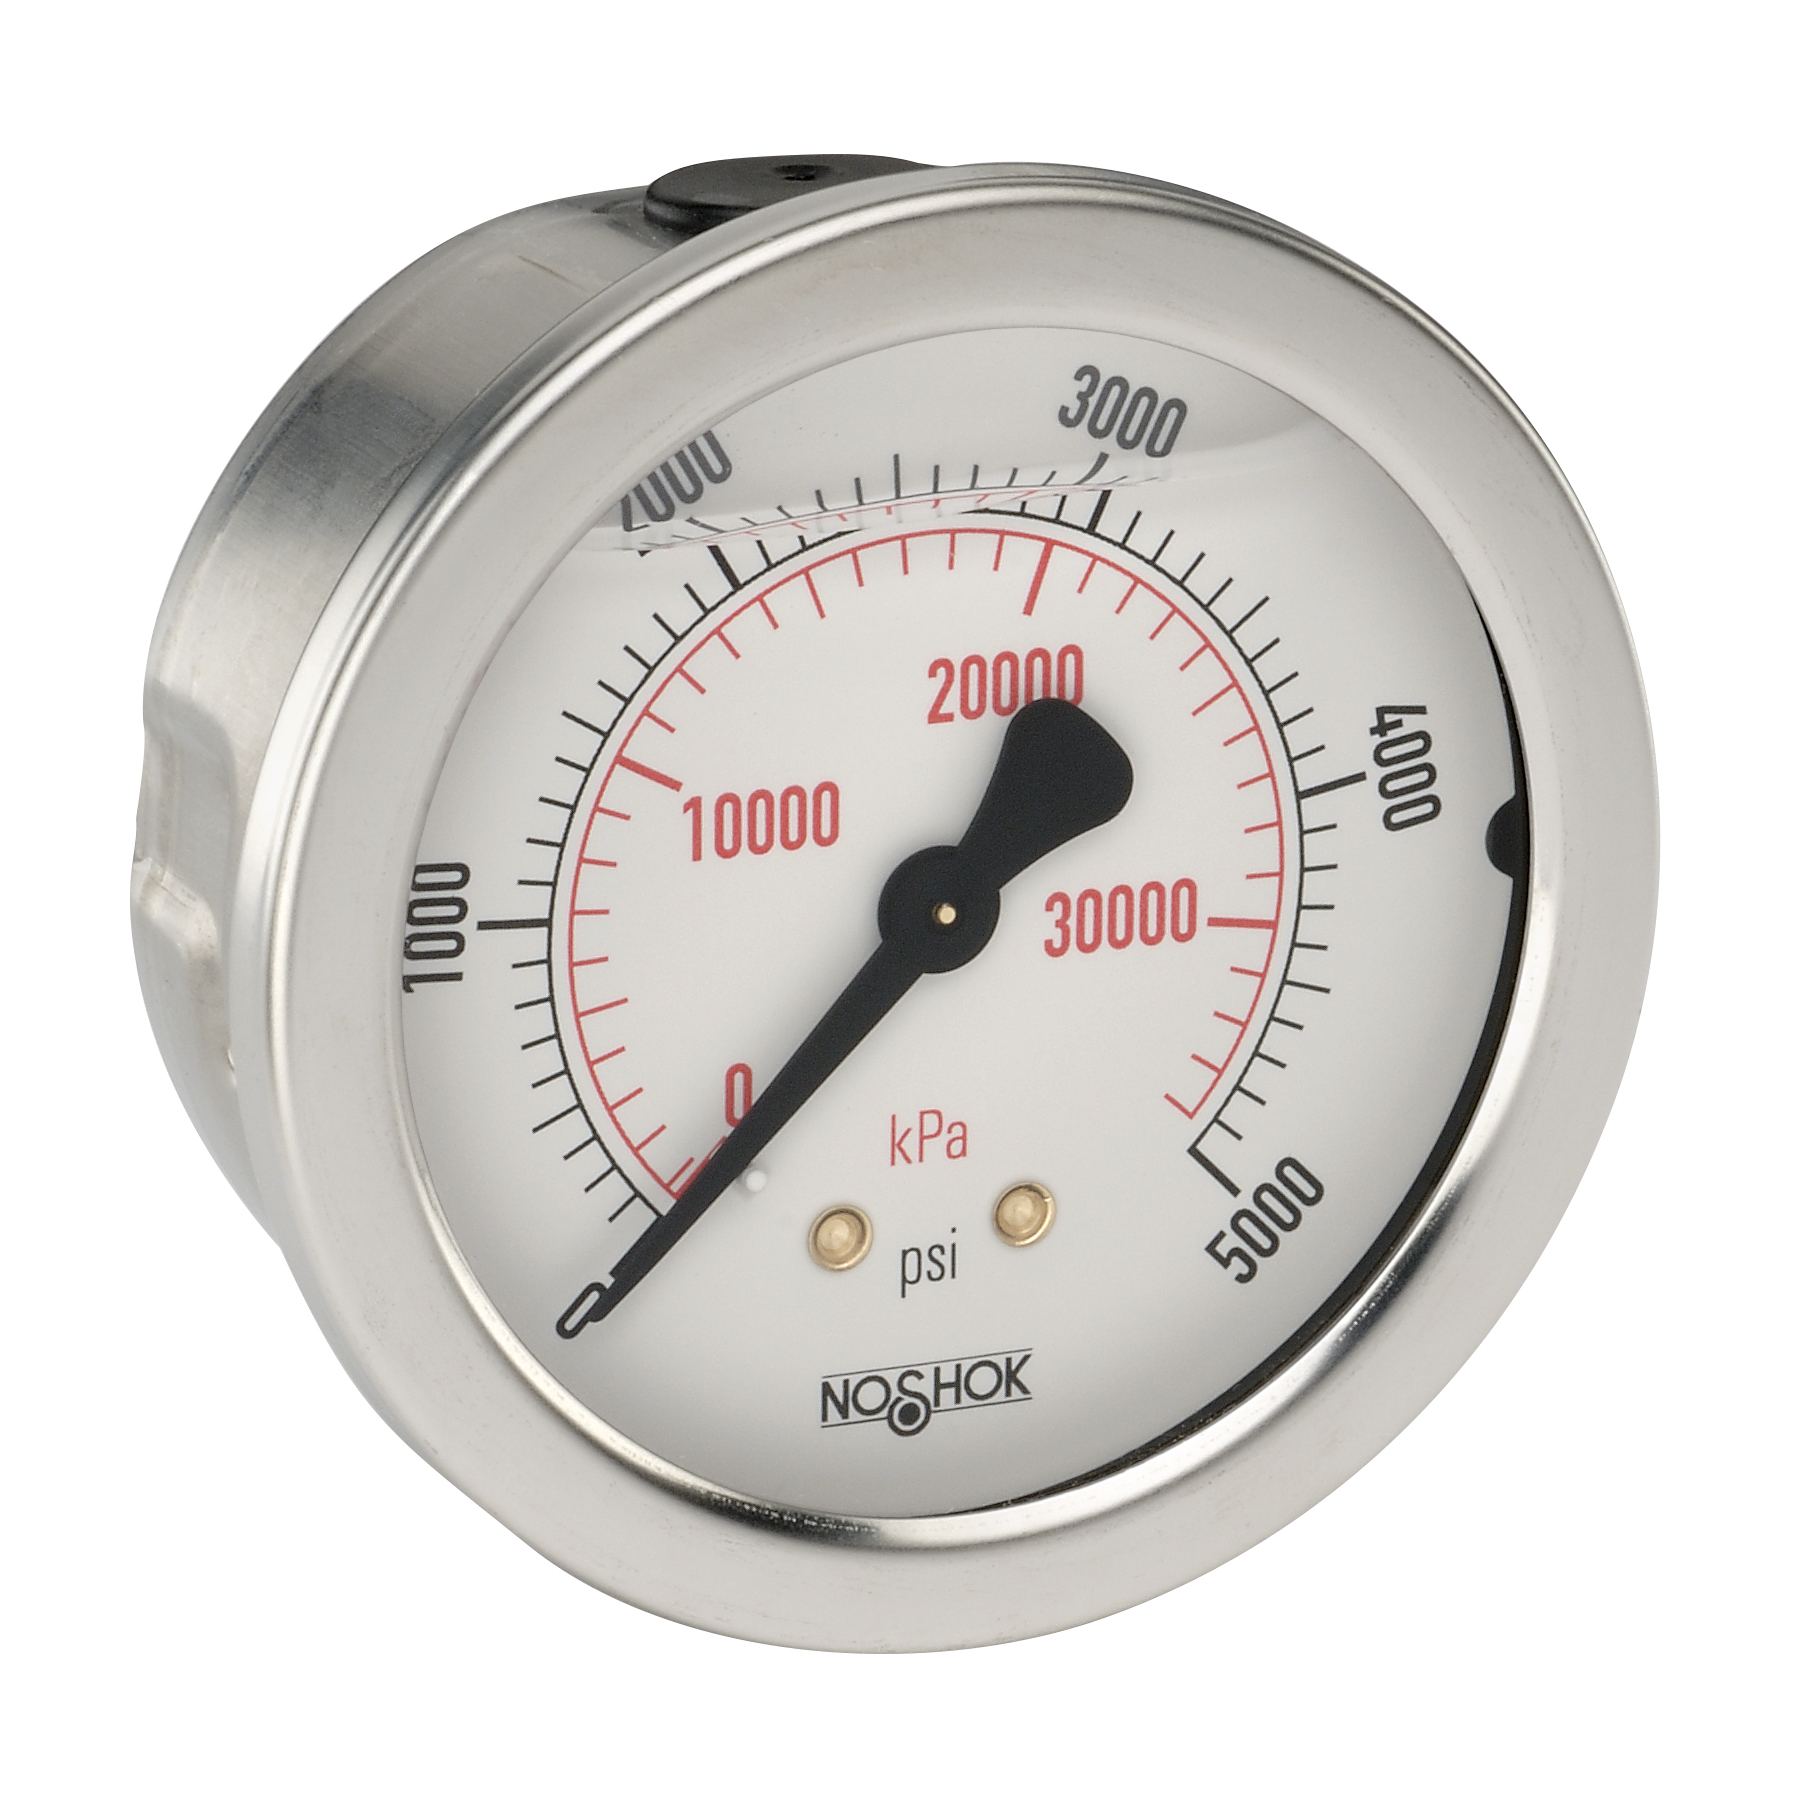 25-911-6000-psi/kPa-GY40 900 Series ABS and Stainless Steel Liquid Filled Pressure Gauges